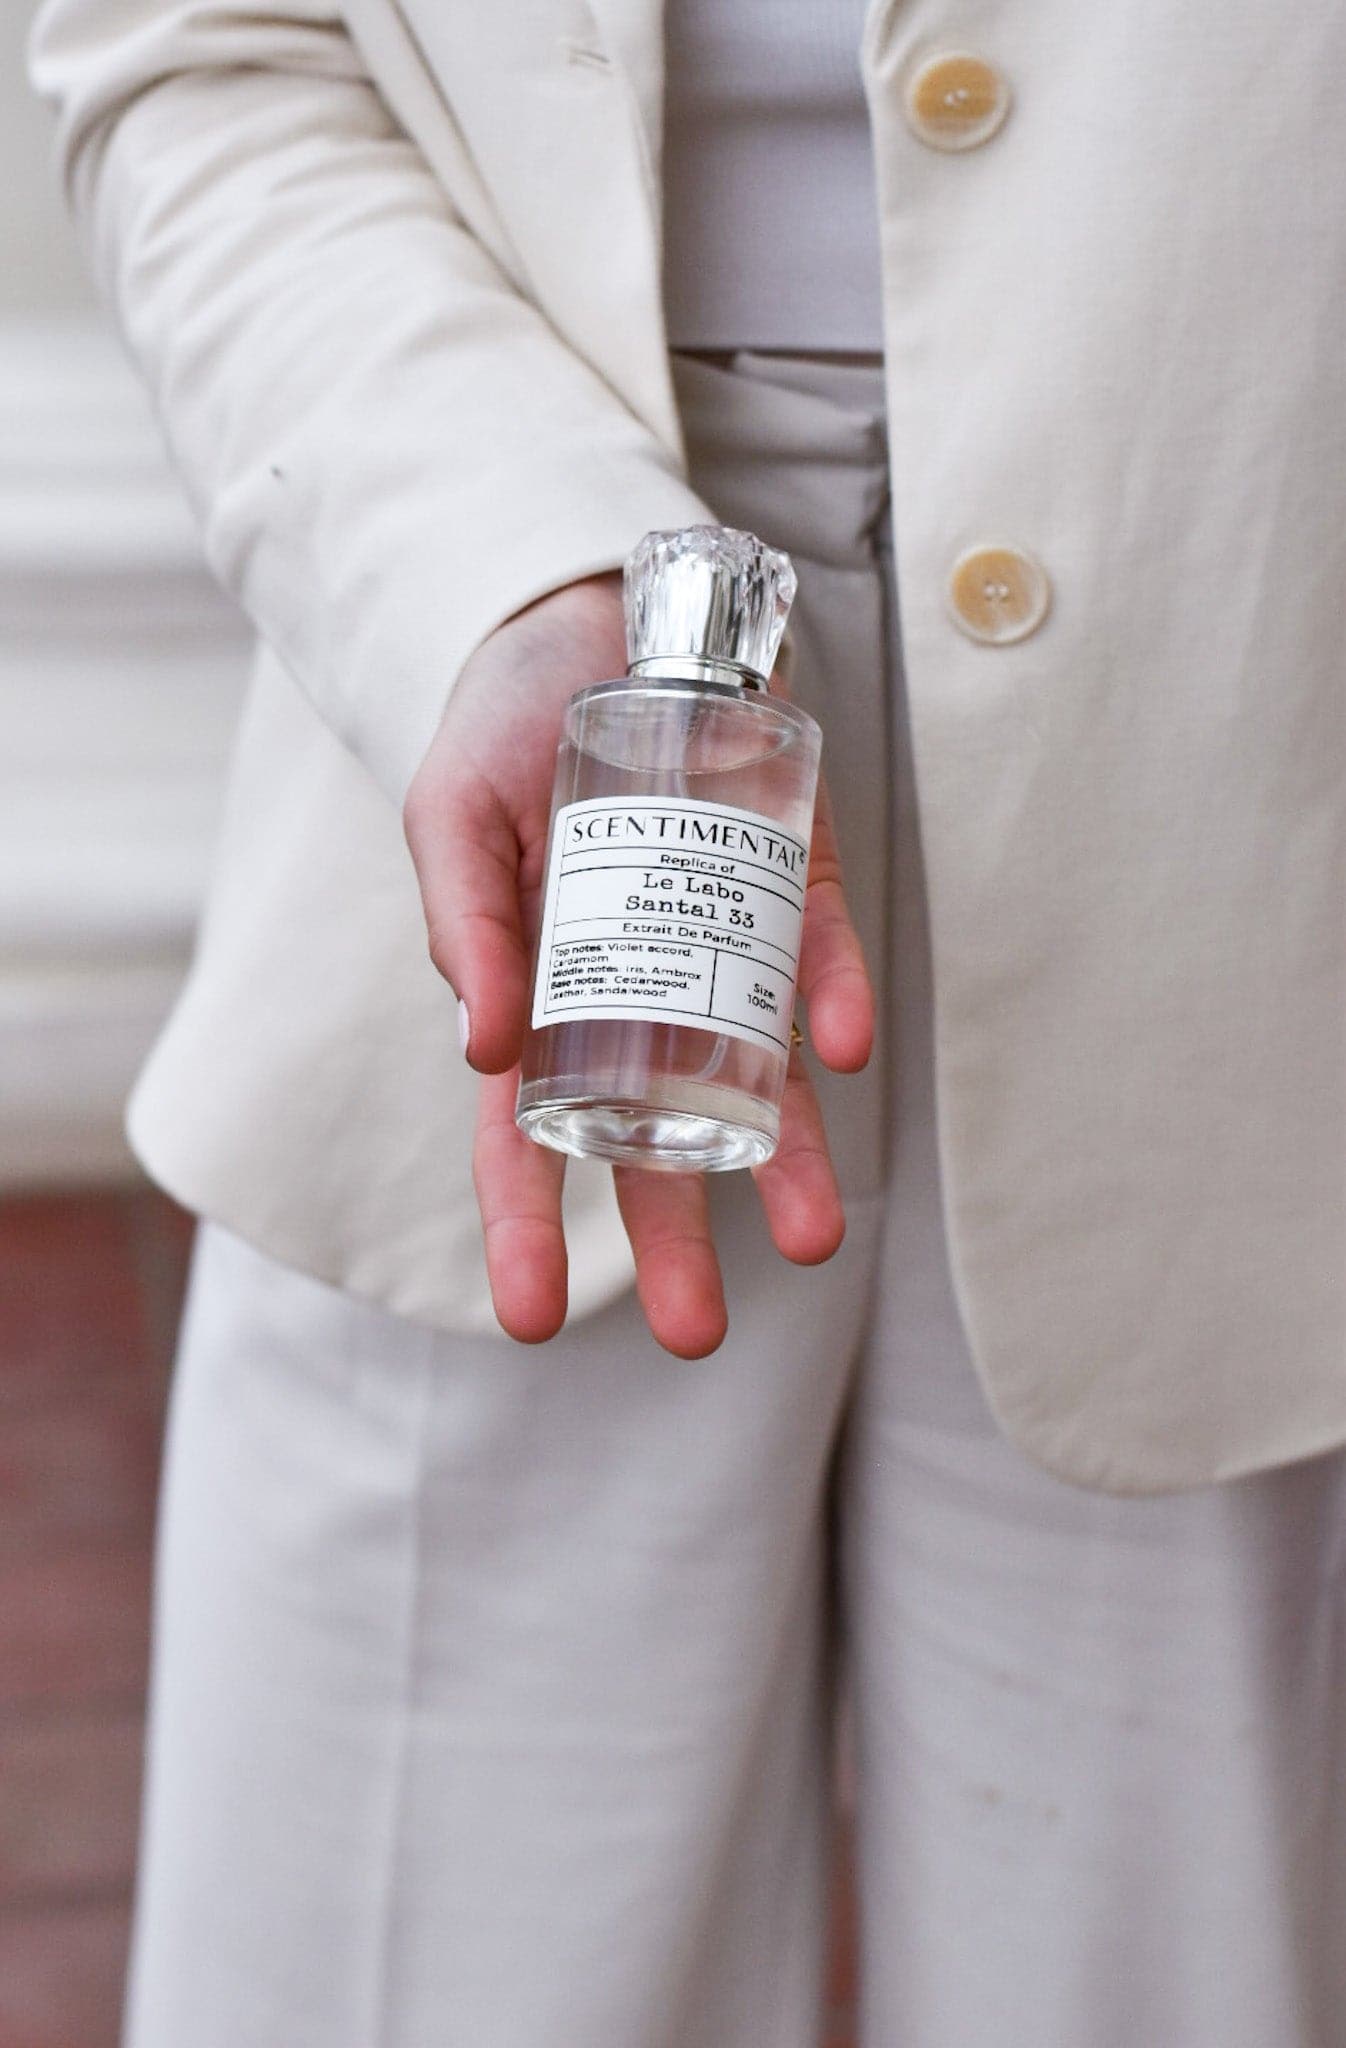 Inspired By Le Labo Santal 33